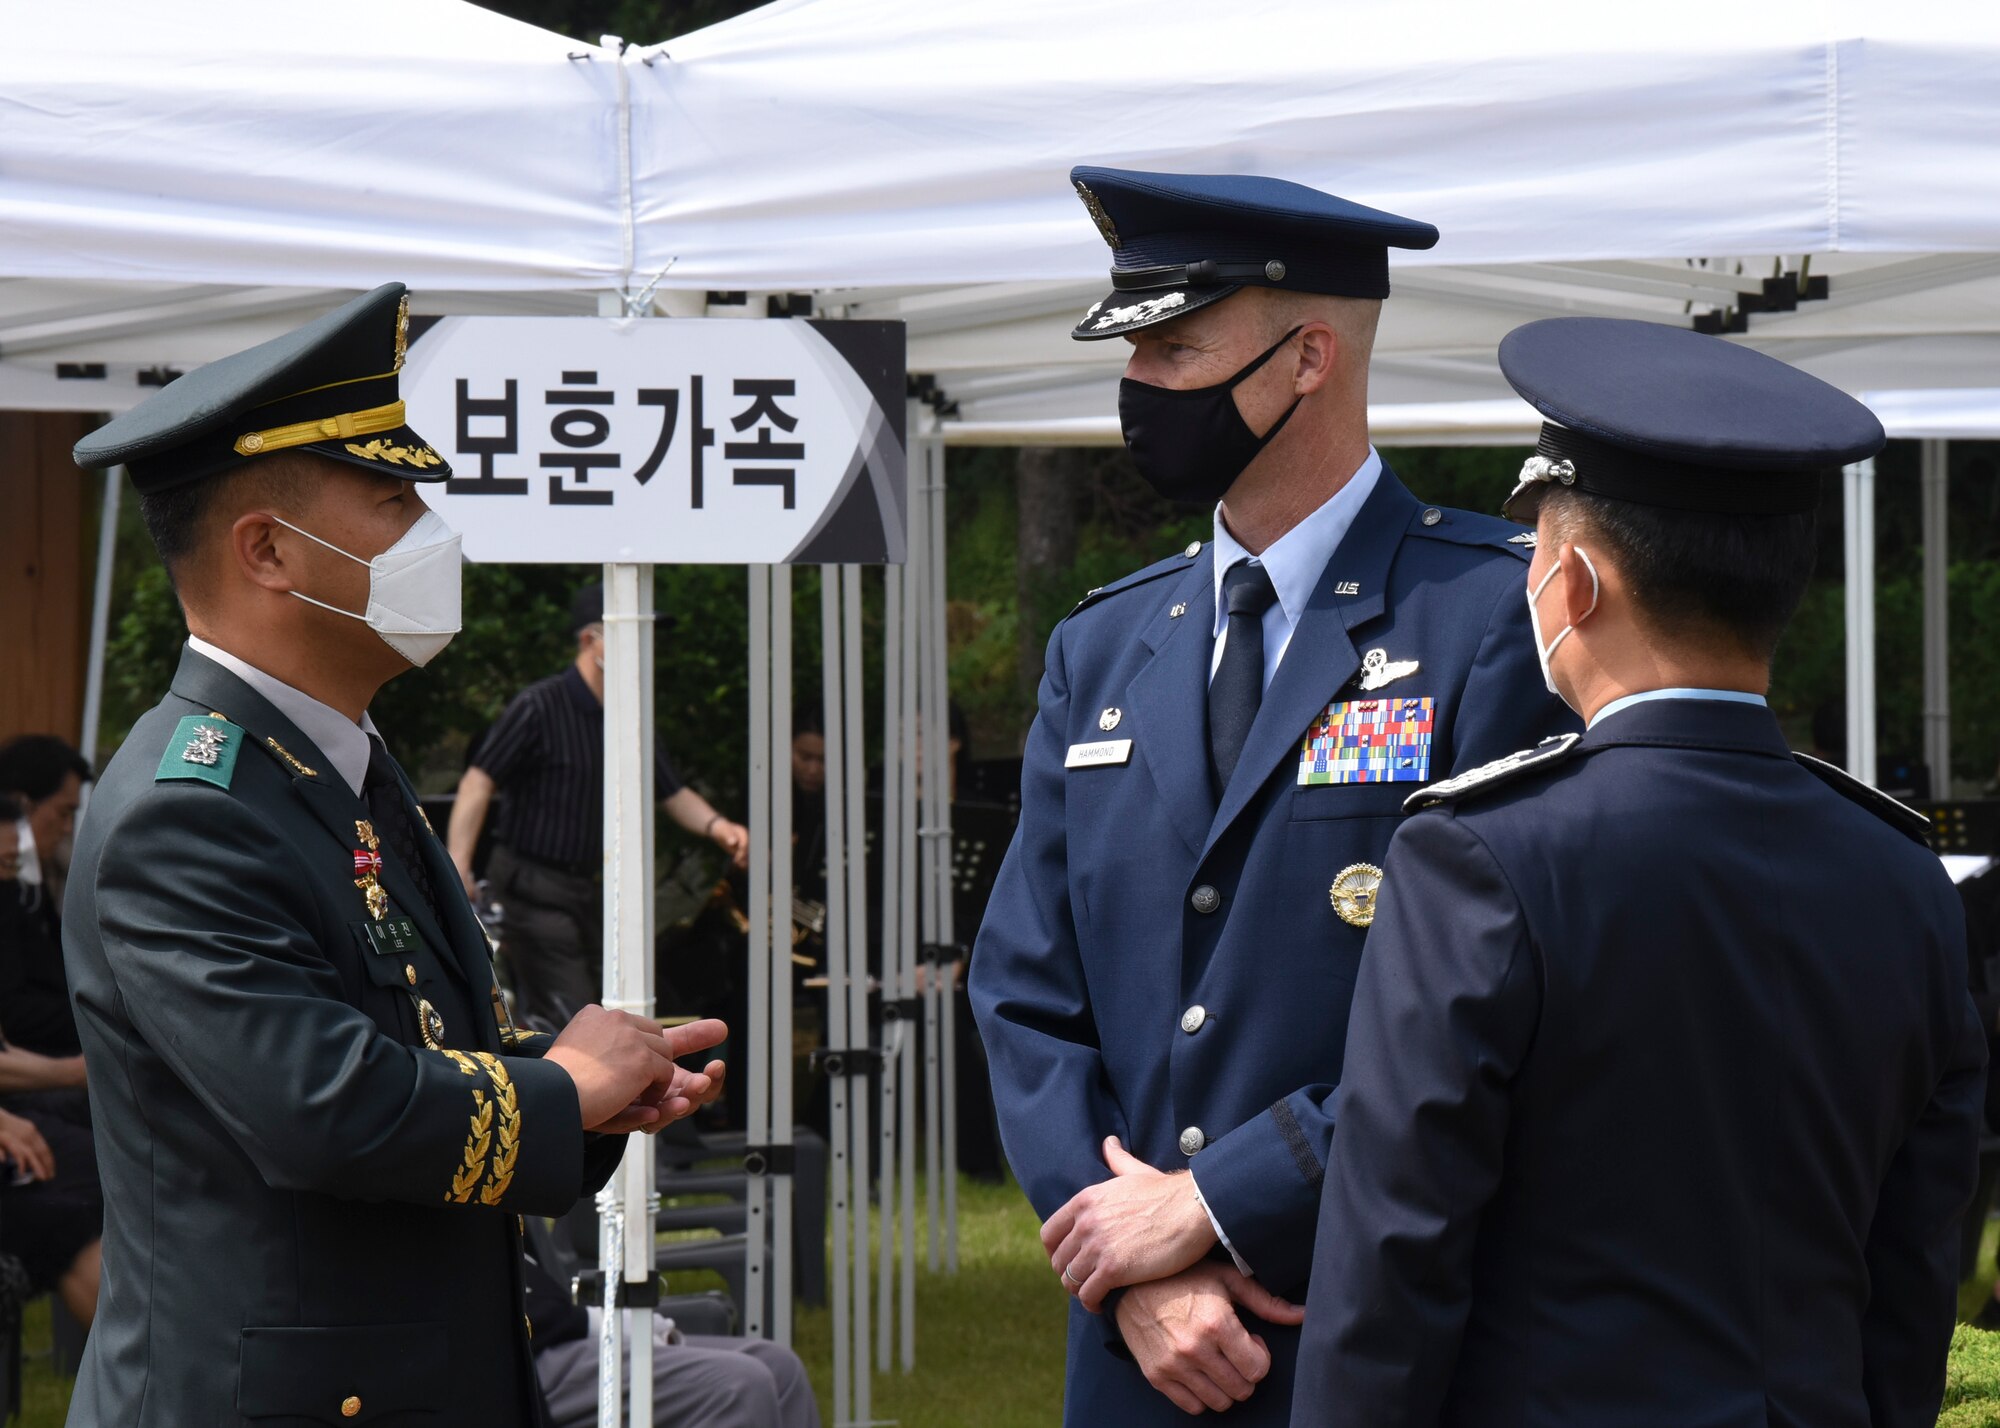 U.S. Air Force Col. Chris Hammond, 8th Fighter Wing commander, greets military leaders from the Republic of Korea including Lt. Col. Woo-Jin Yi, 35th Army Division commander, prior to the Korean Memorial Day ceremony in Gunsan City, Republic of Korea, June 6, 2020. Korean Memorial Day is a national holiday which commemorates the lives of Korean citizens who died while serving in the military and those who lost their lives during the independence movement. (U.S. Air Force photo by Staff Sgt. Anthony Hetlage)